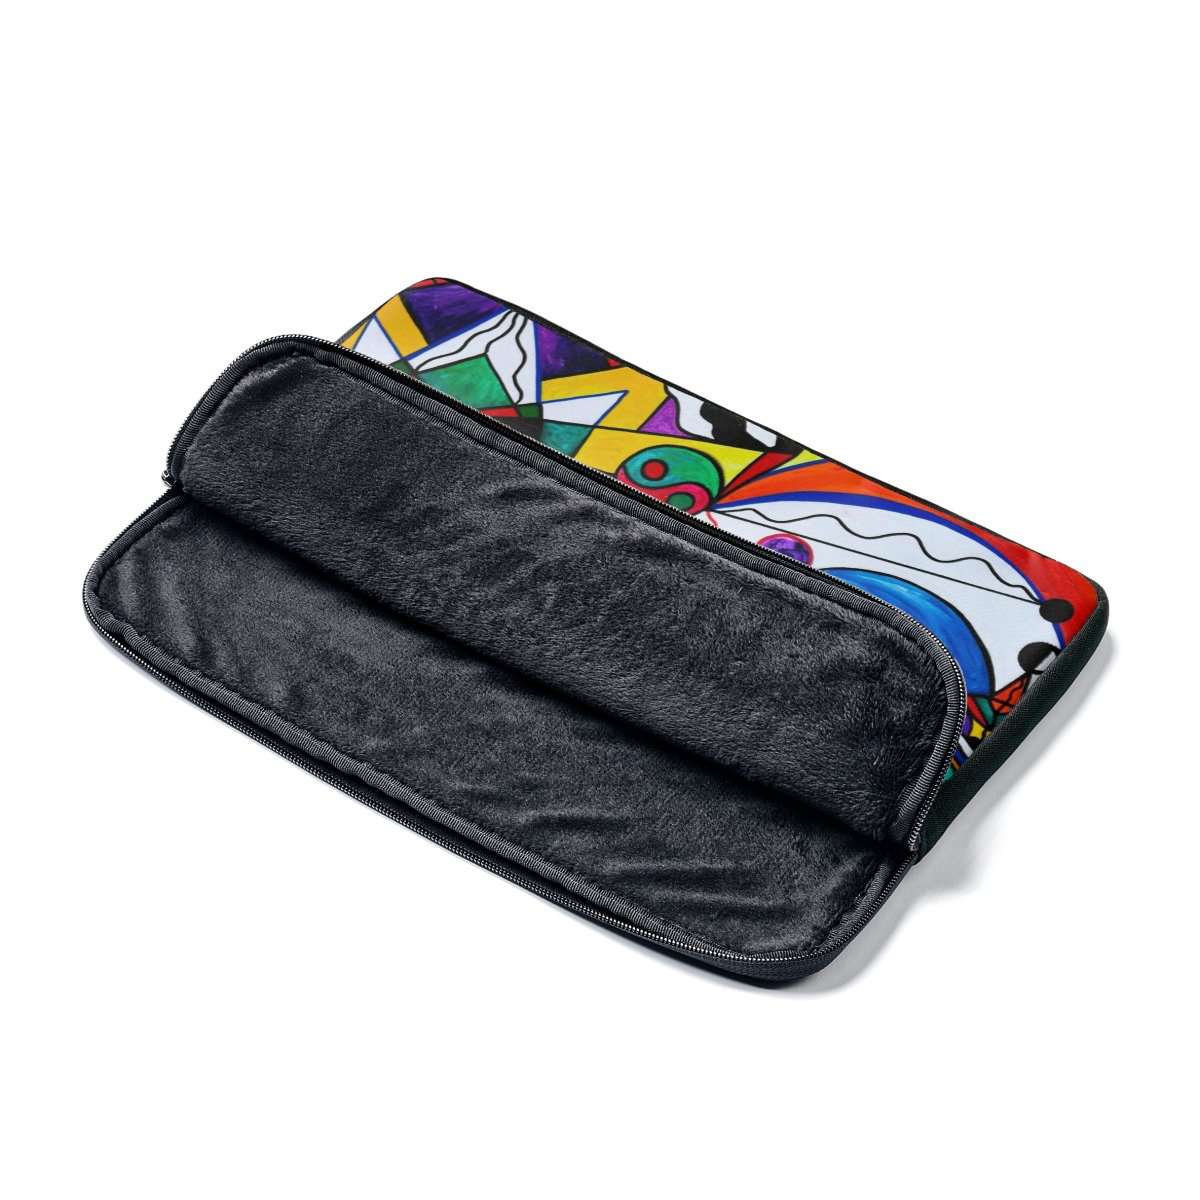 where-can-i-buy-compatibility-laptop-sleeve-online-now_2.jpg